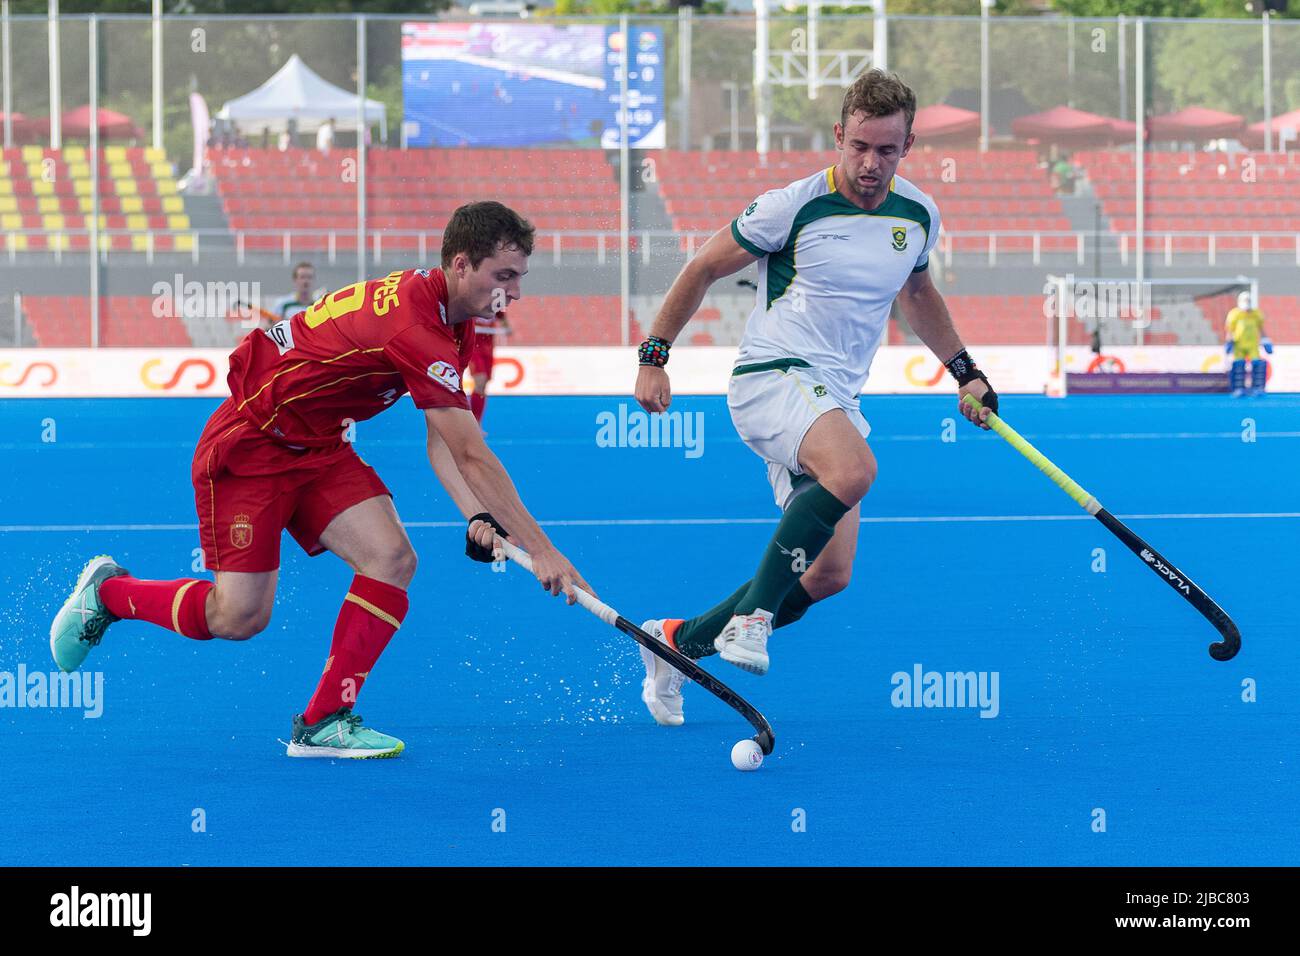 Gerard Clapes of Spain and Daniel Bell of South Africa during the FIH Pro League match between Spain and South Africa played at Olimpic de Terrassa Stadium on June 4, 2022 in Terassa, Spain. (Photo by Laura Barbany / PRESSINPHOTO) Stock Photo